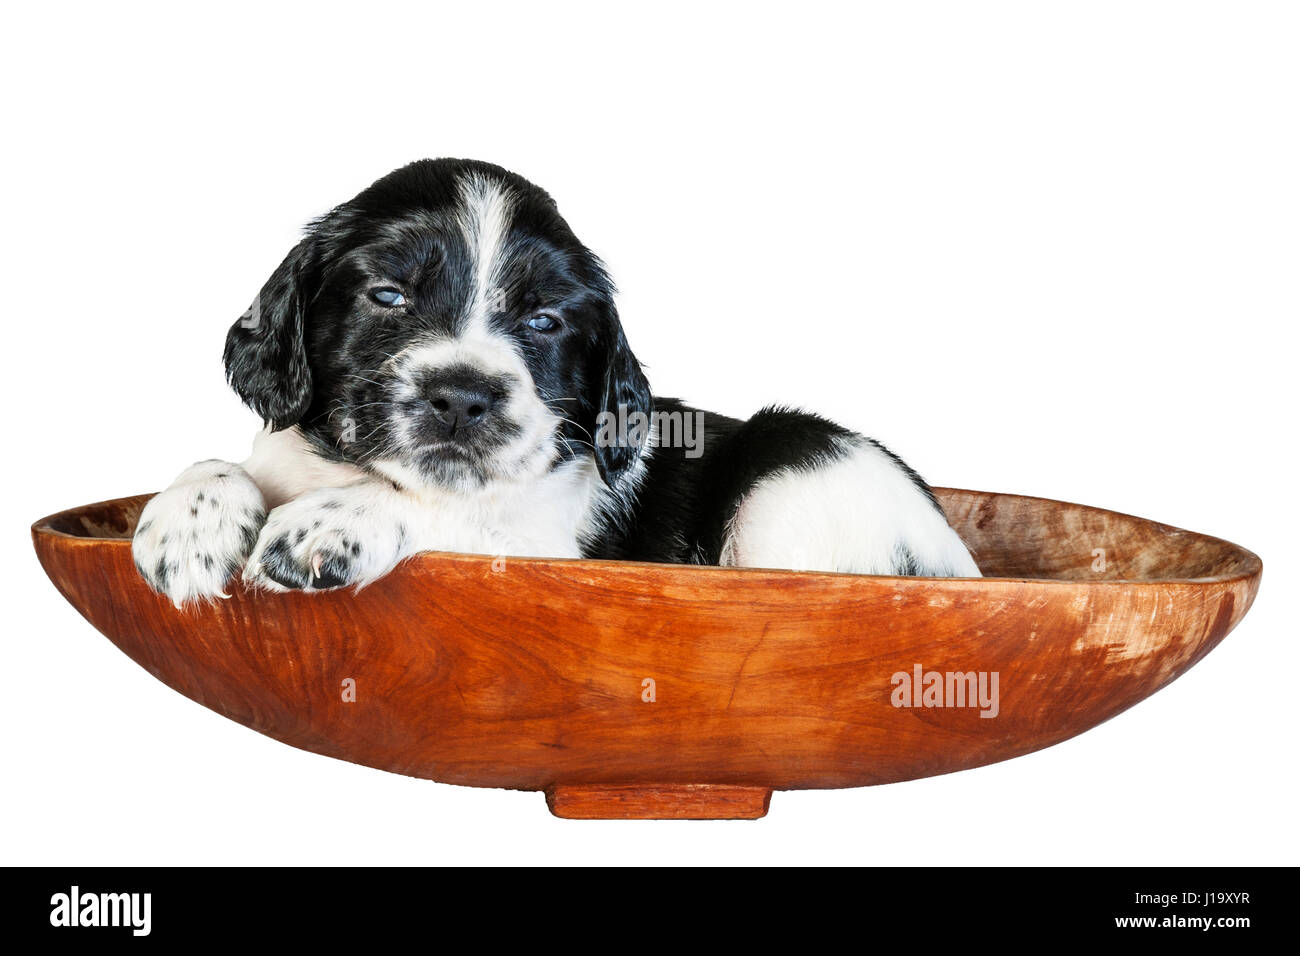 A 4 week old black and white English Springer Spaniel puppy in a basket Stock Photo